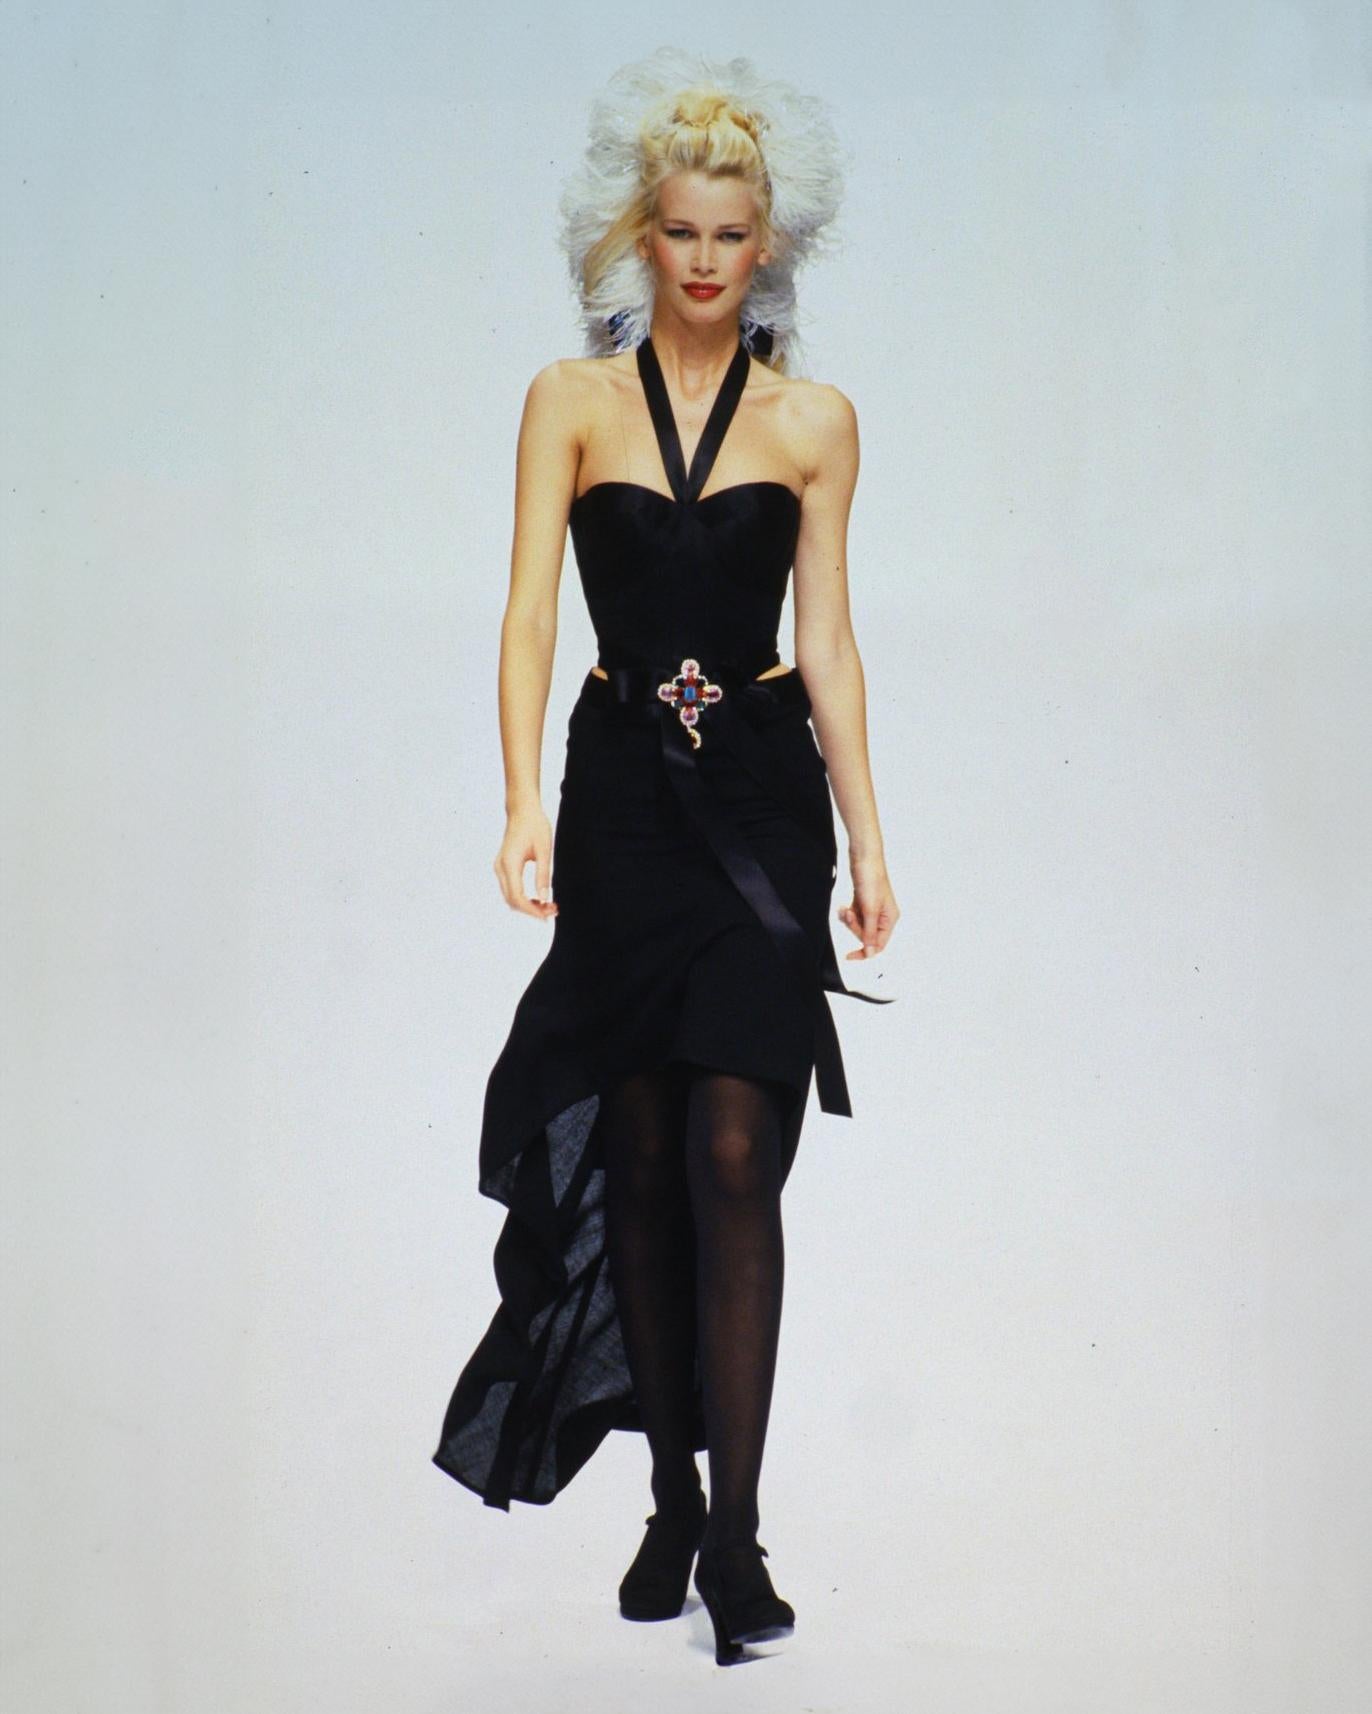 Women's Chanel by Karl Lagerfeld Haute Couture Black Silk Evening Dress, fw 1994 For Sale